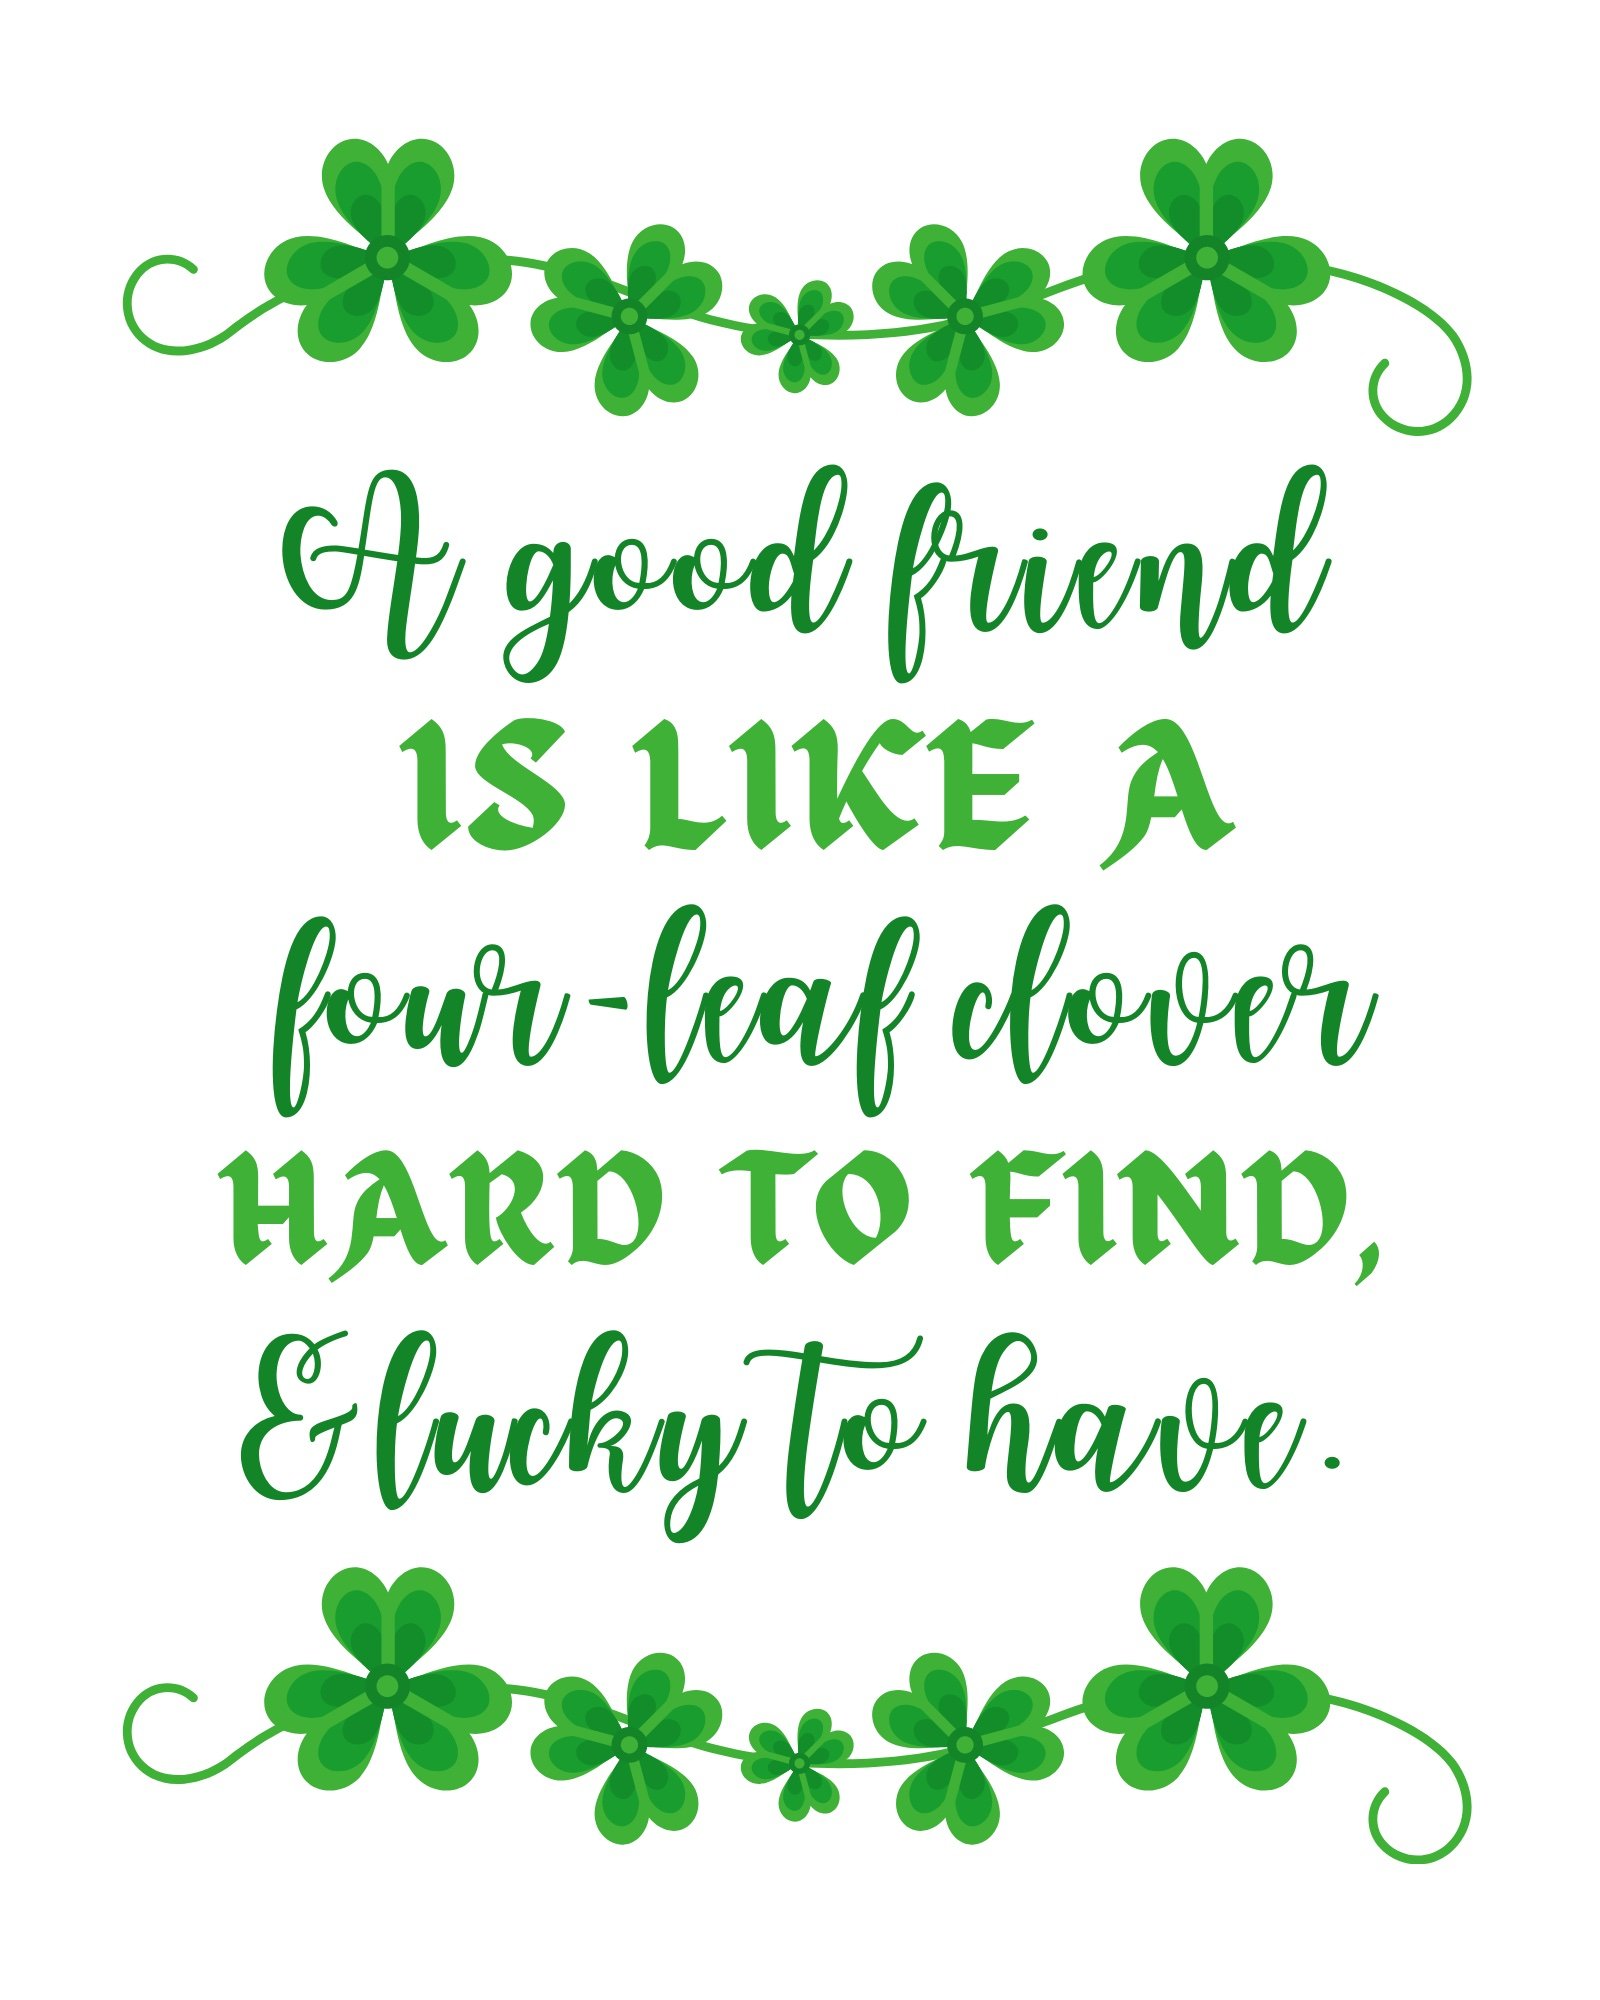 shamrock background with the phrase "a good friend is like a four-leaf clover, hard to find and lucky to have"